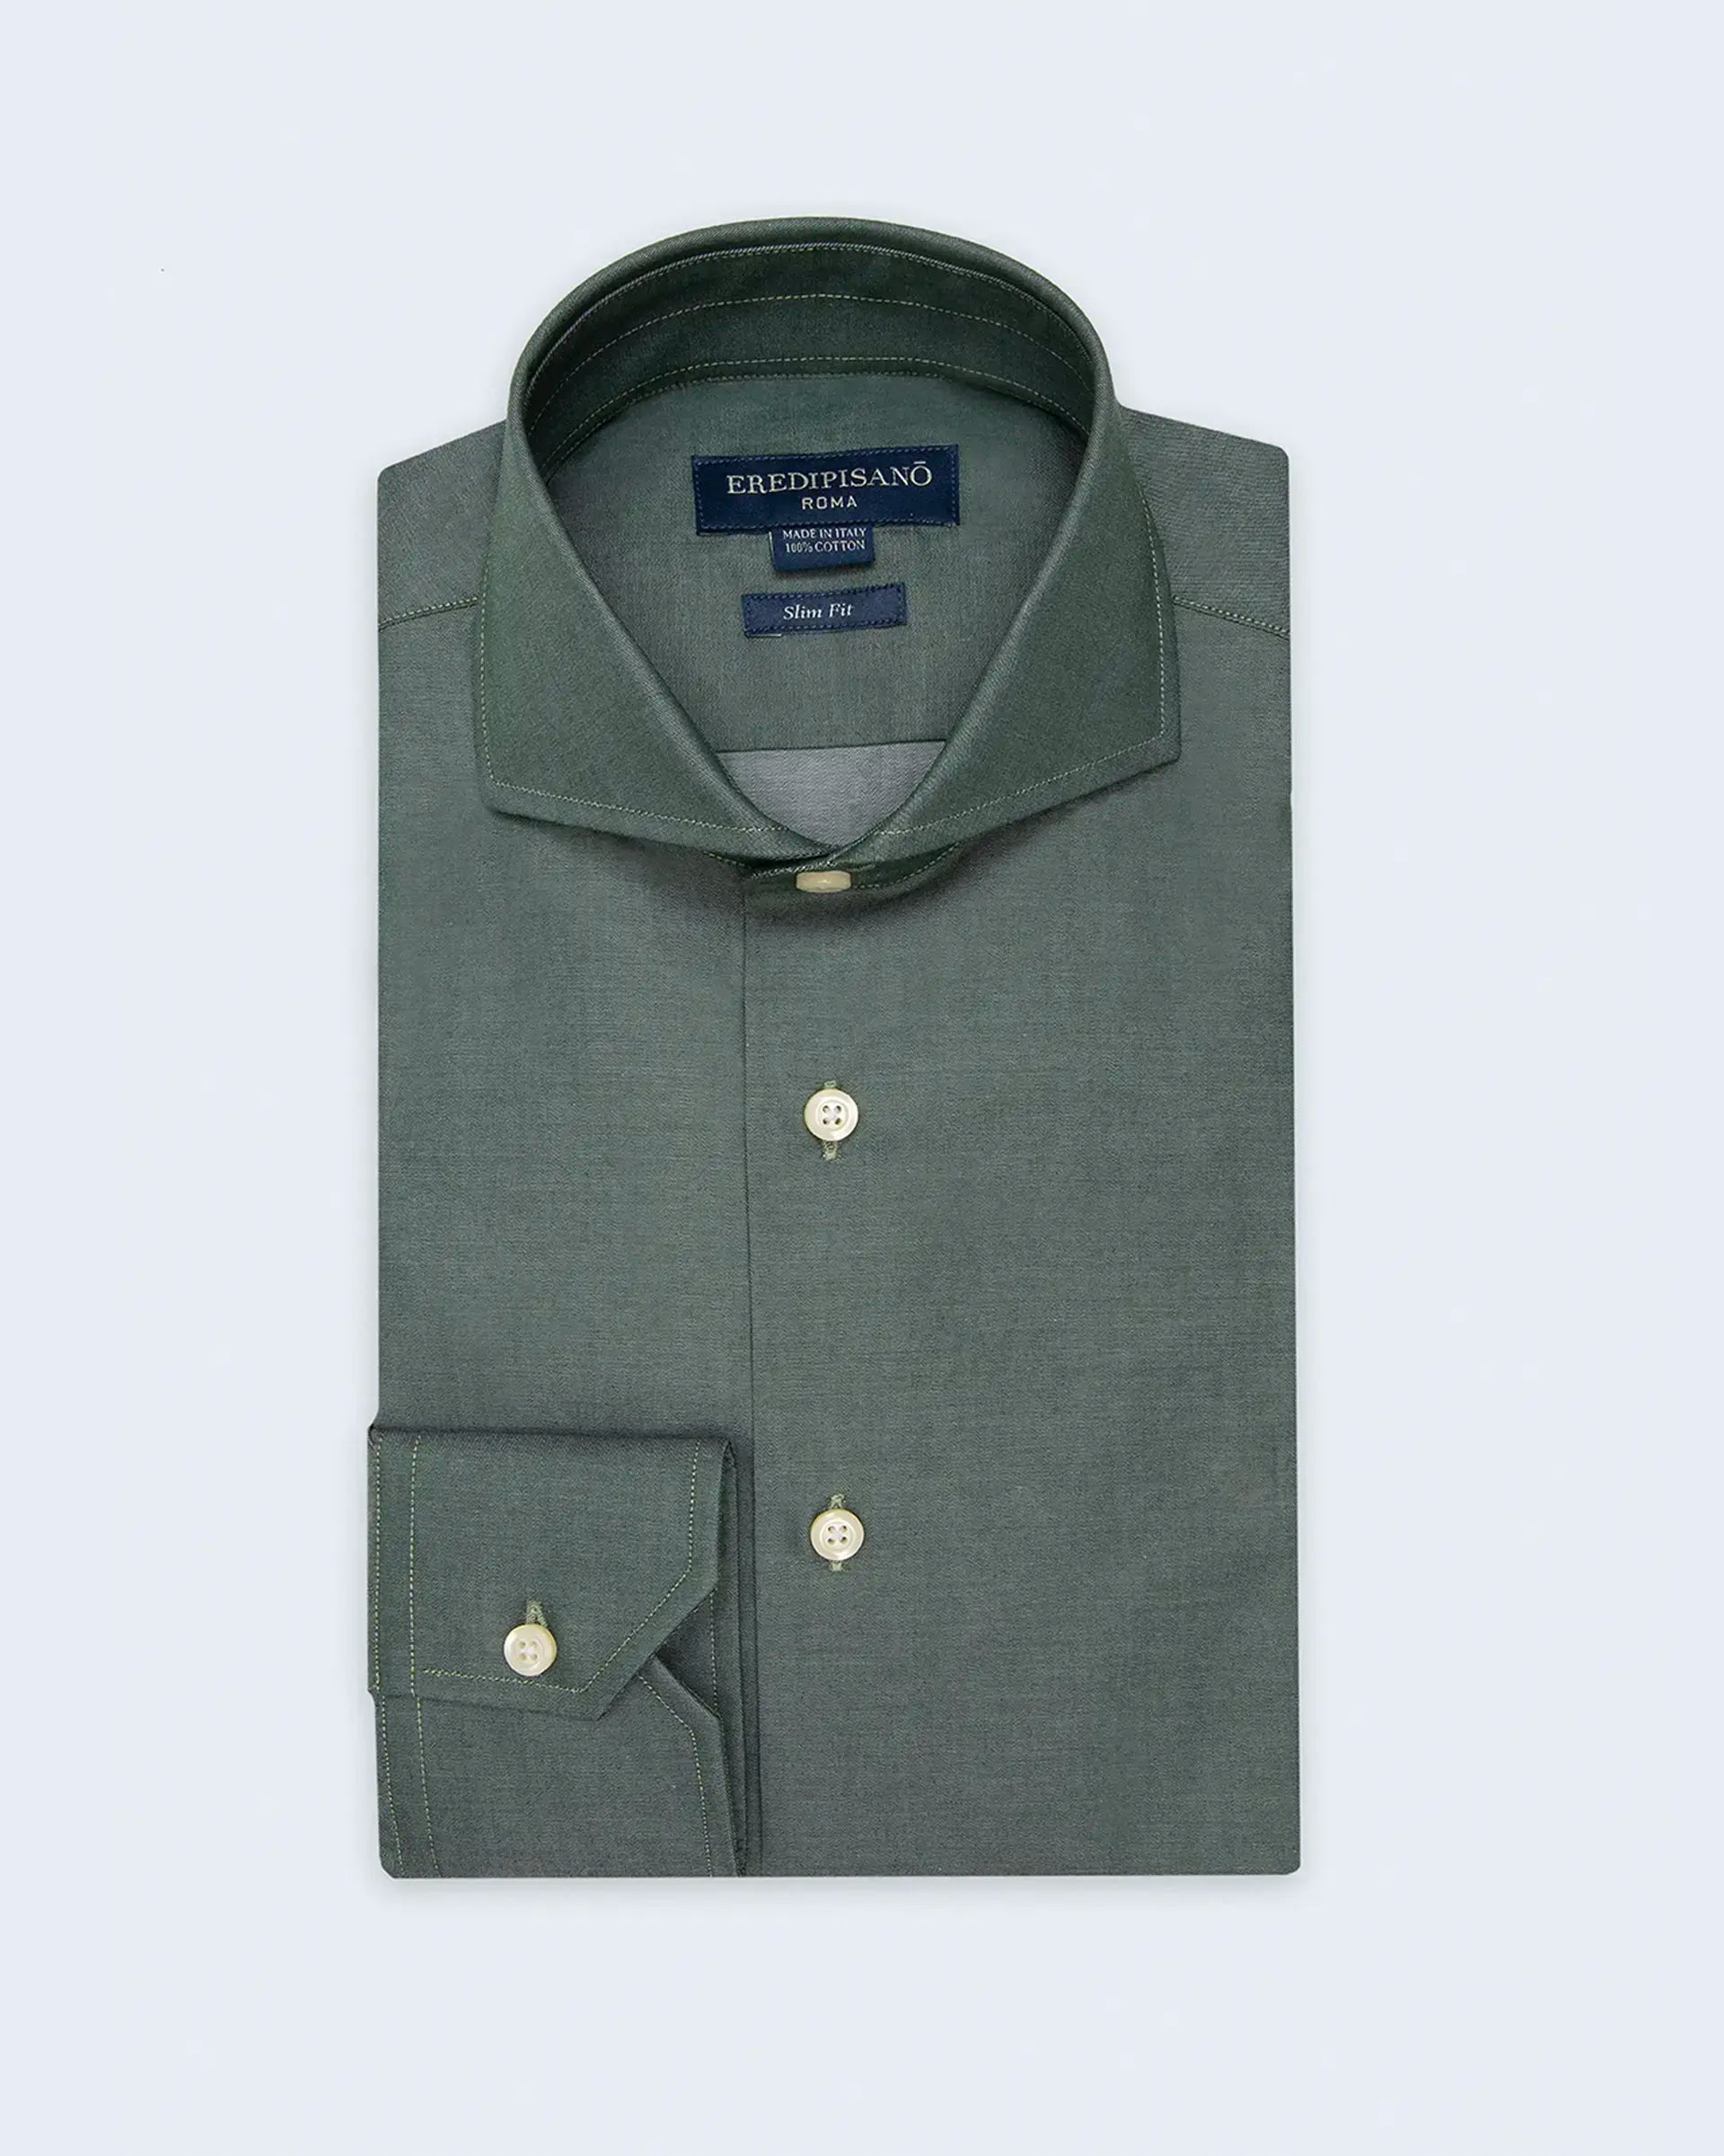 Military green shirt in slim fit cotton twill with Venice collar